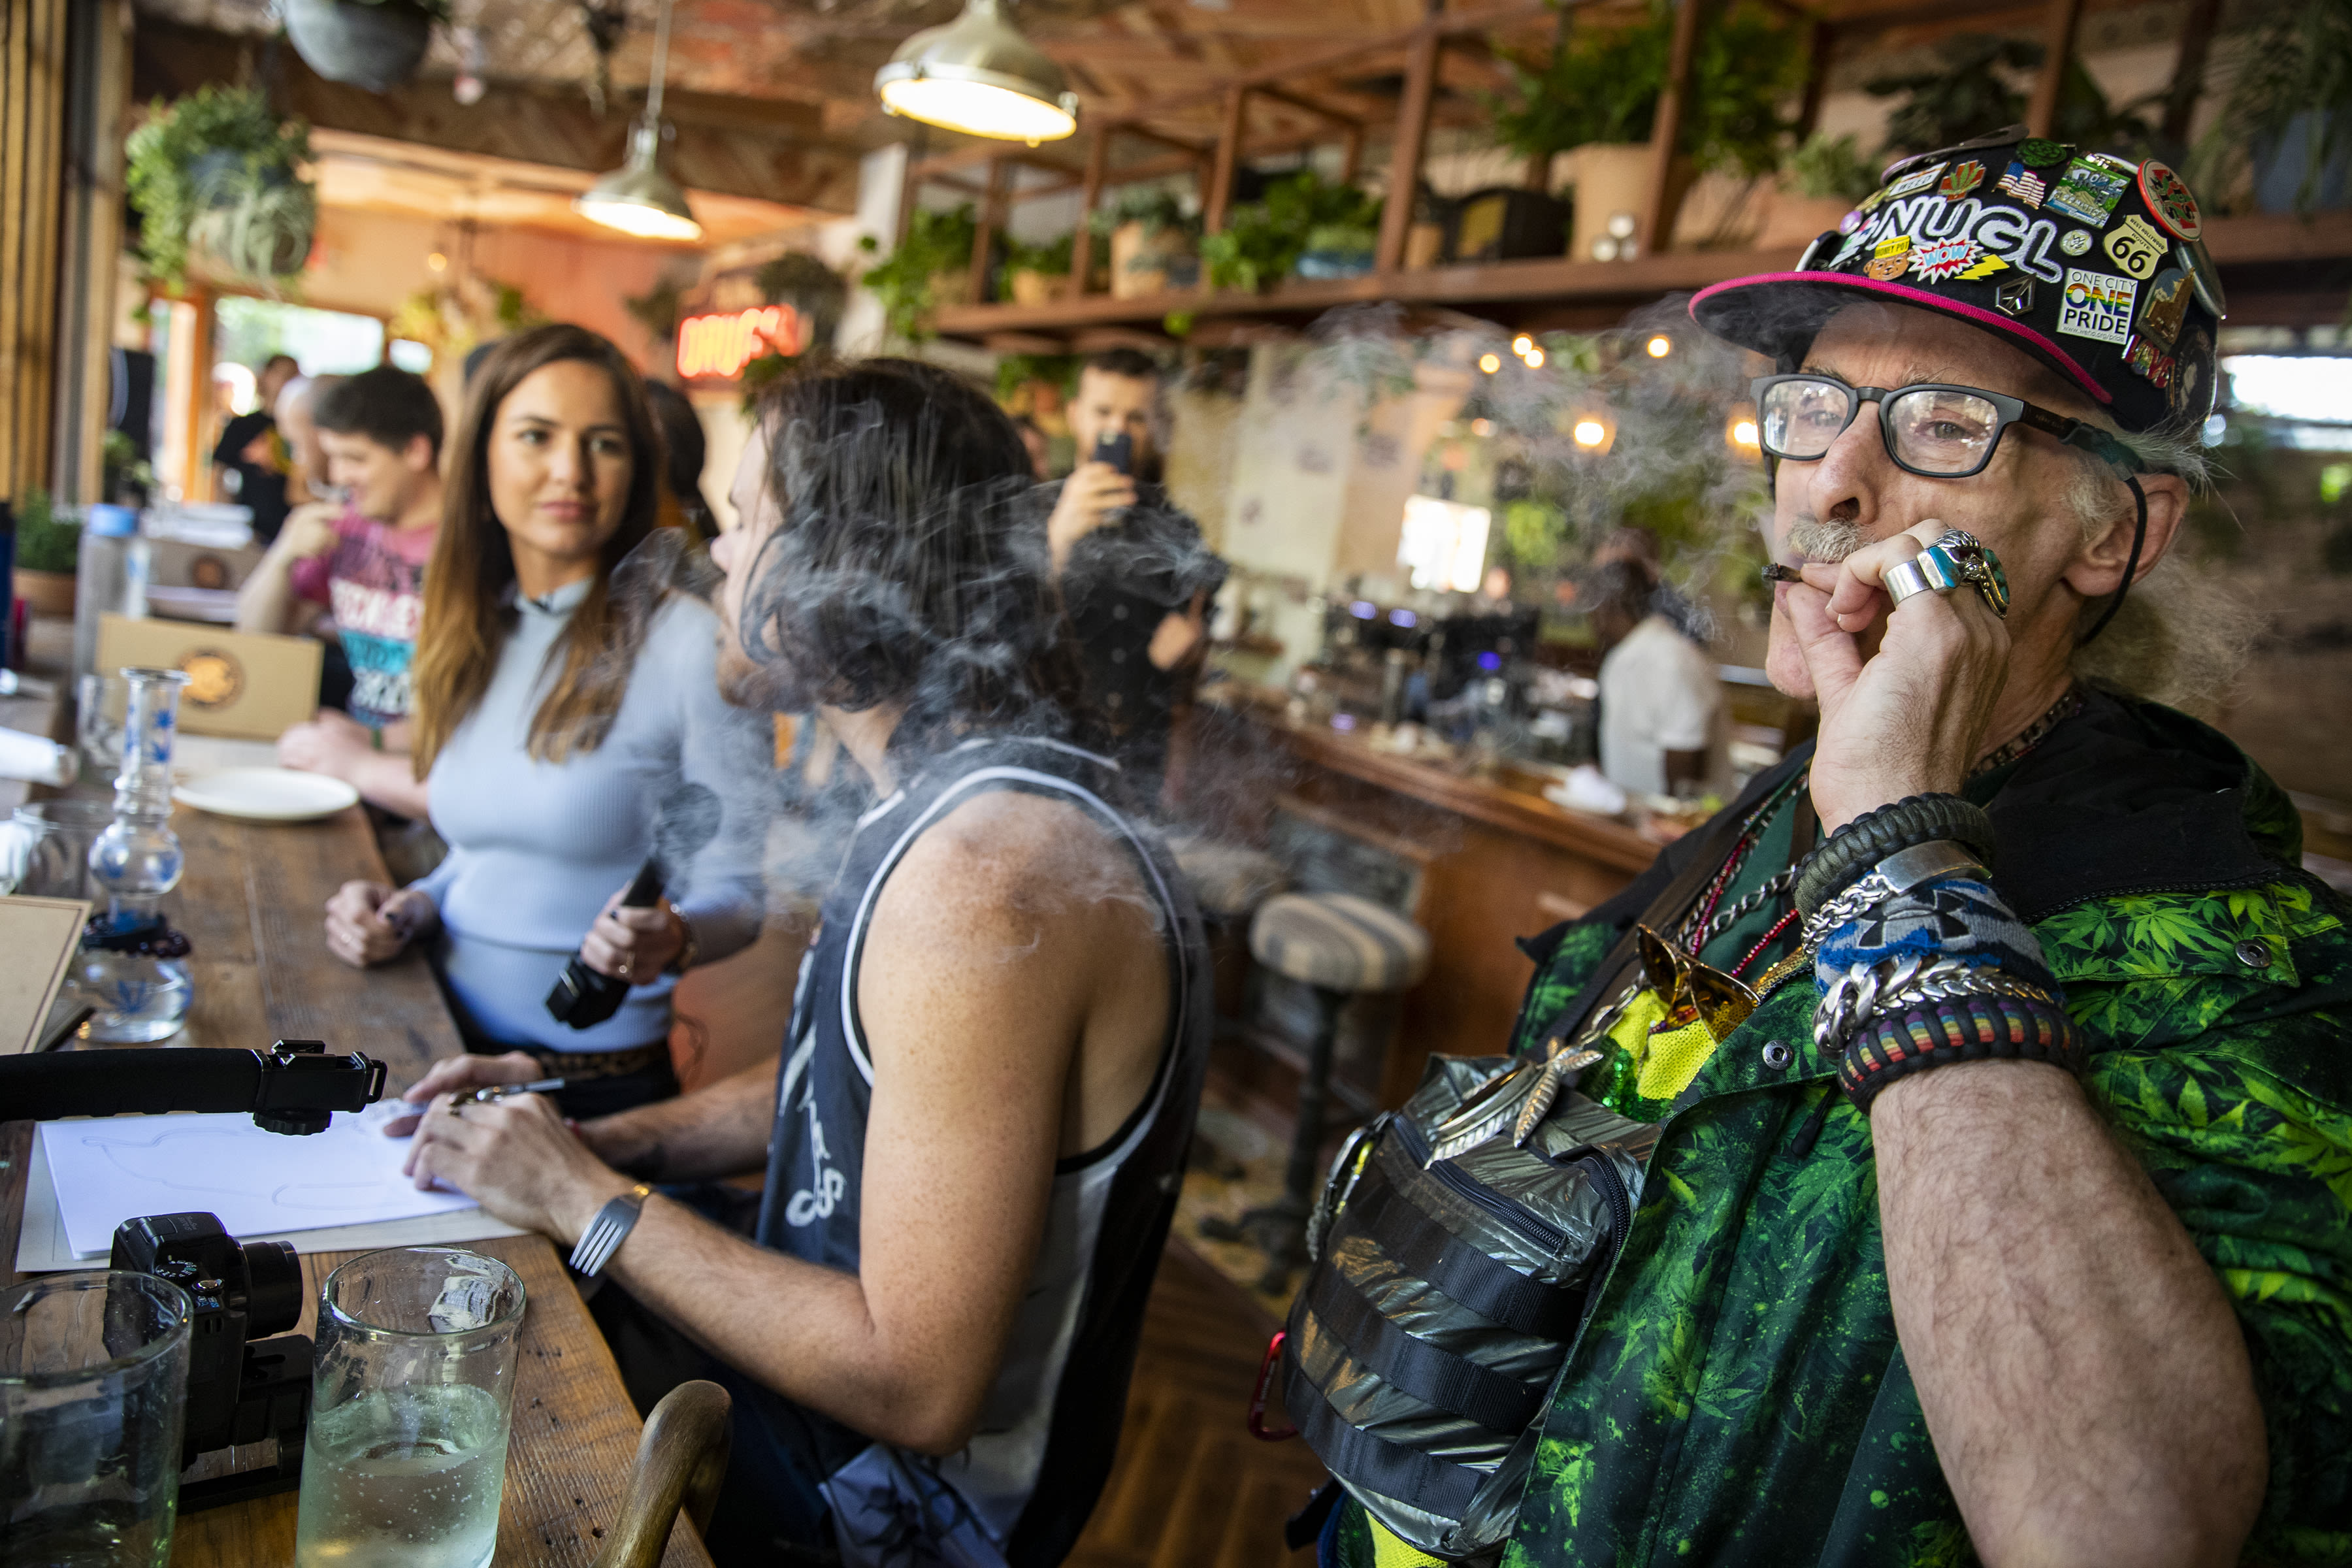 California Assembly passes bill allowing Amsterdam-style cannabis cafes